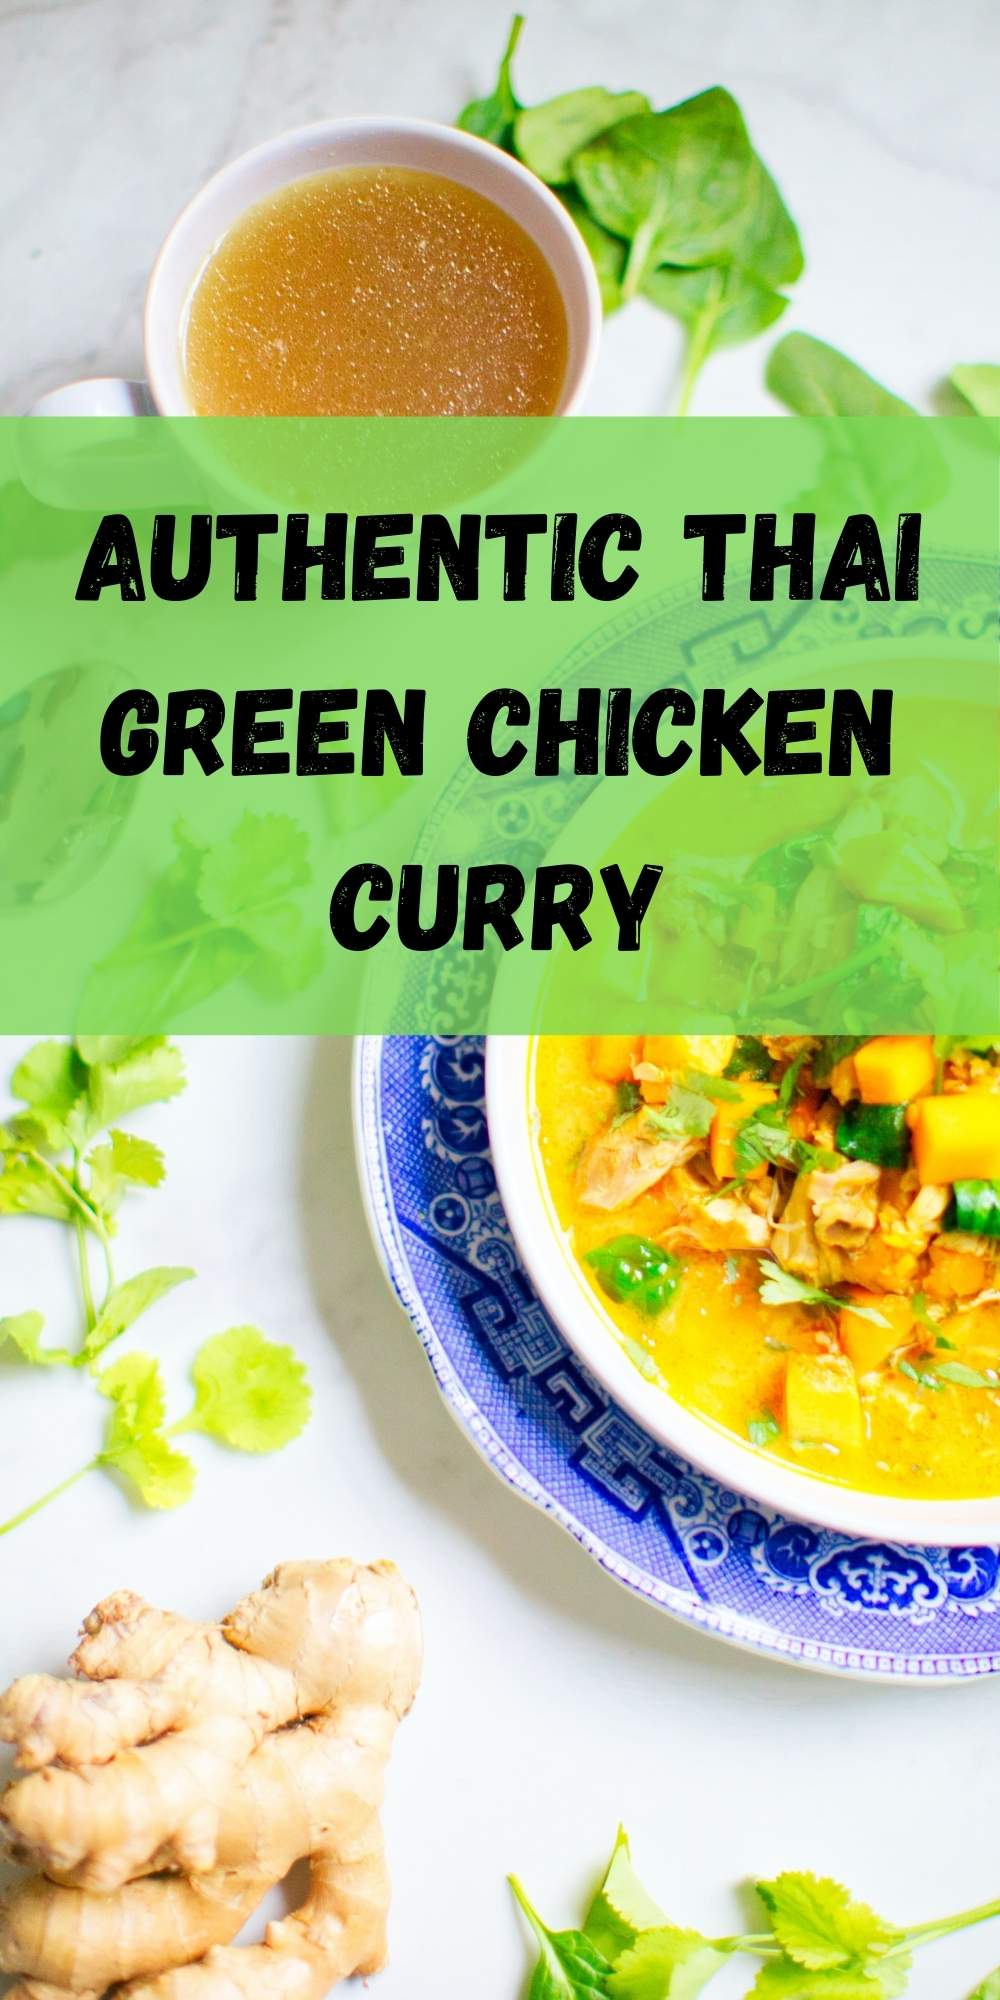 Authentic Thai Green Chicken Curry in a white bowl on a blue plate with coriander leaves on the white table cloth